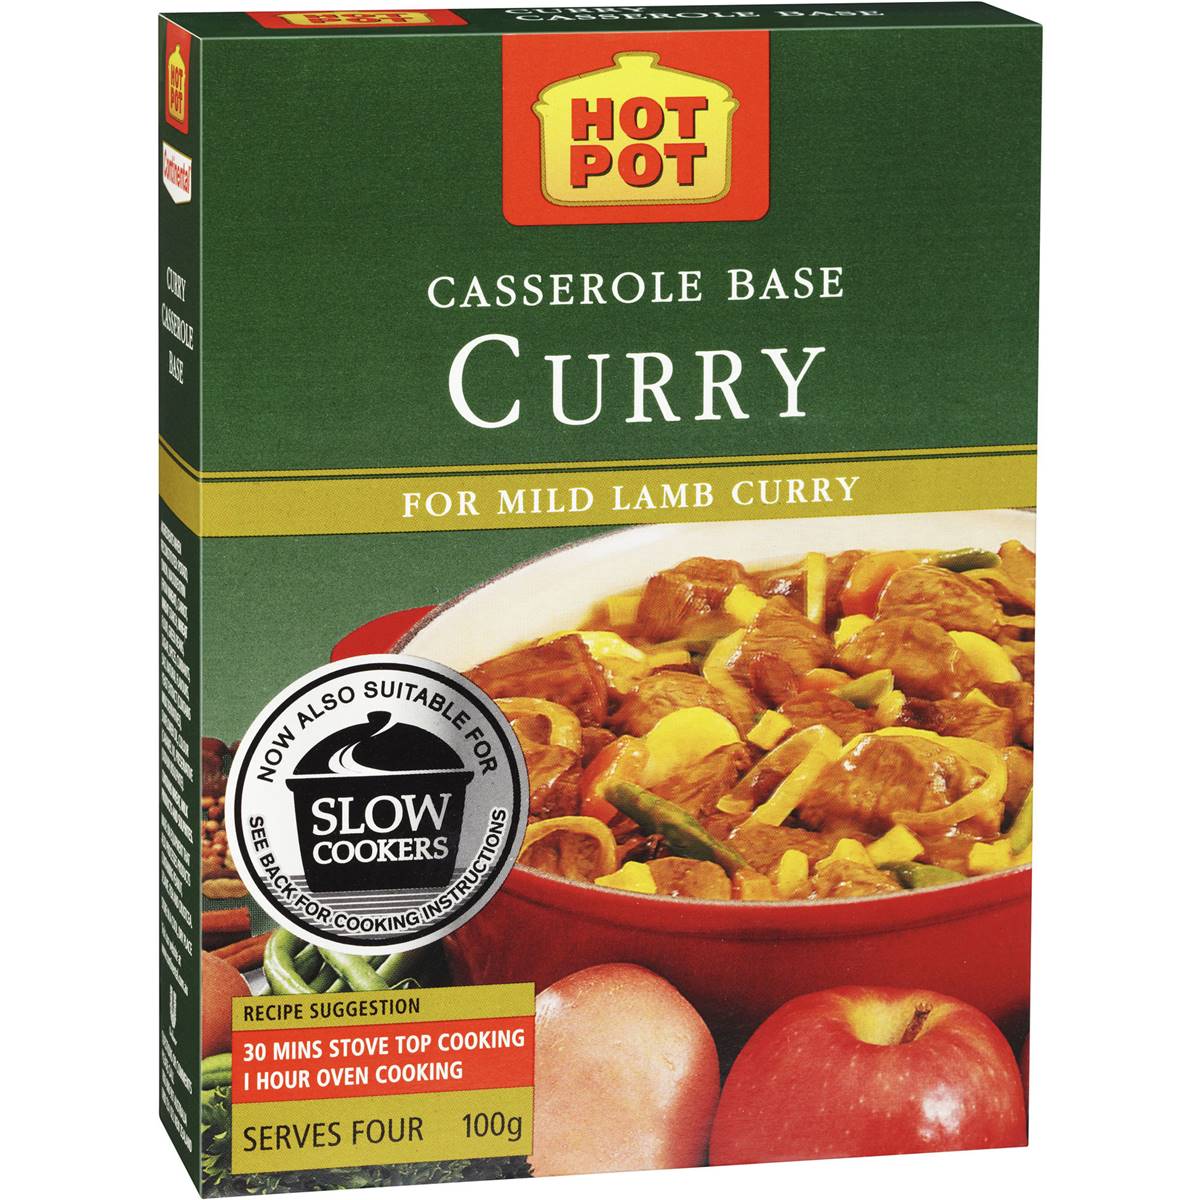 Calories in Hot Pot Casserole Base Curry